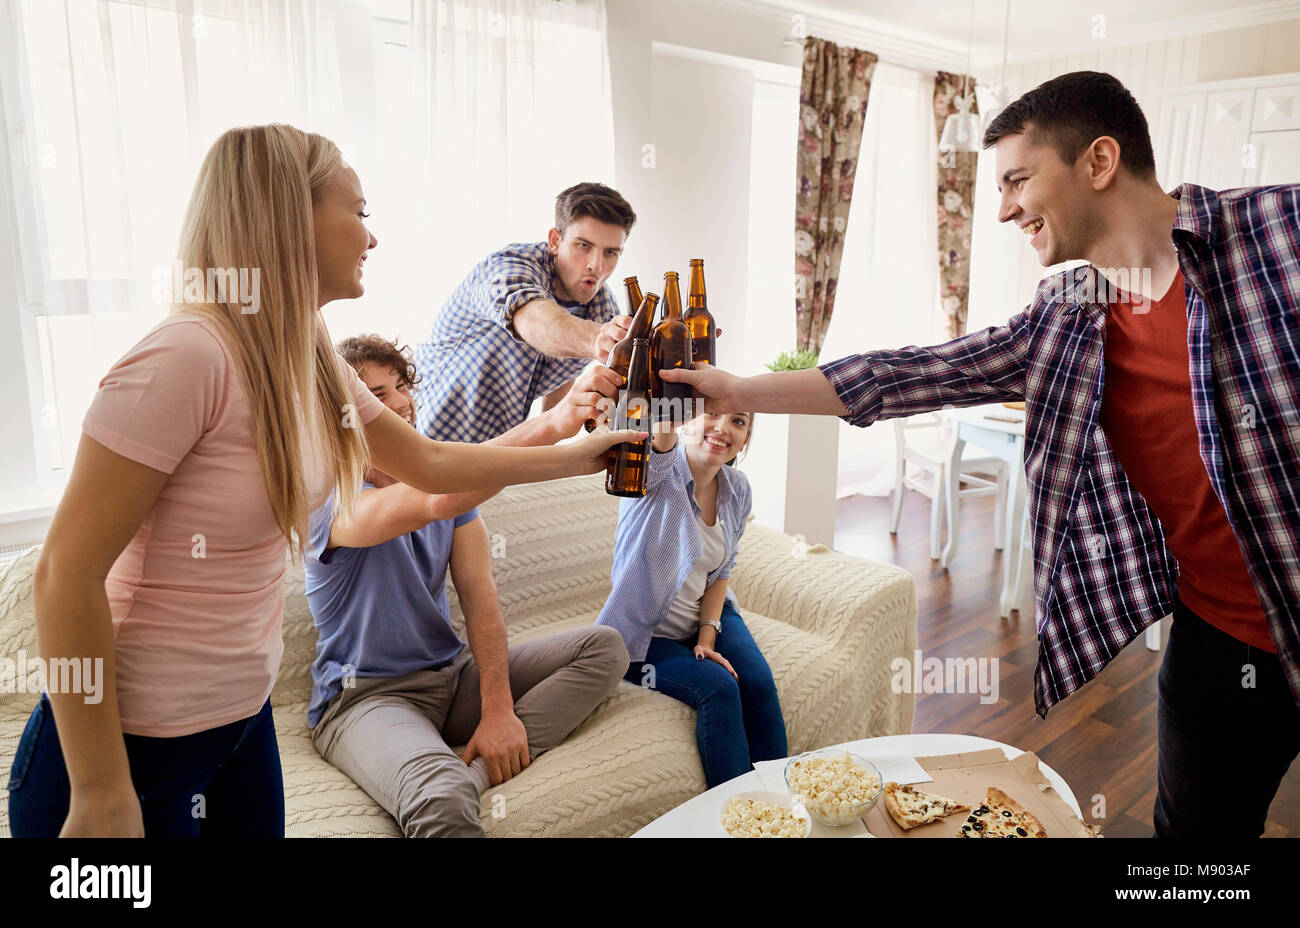 A group of friends are clinking bottles at a meeting. Stock Photo